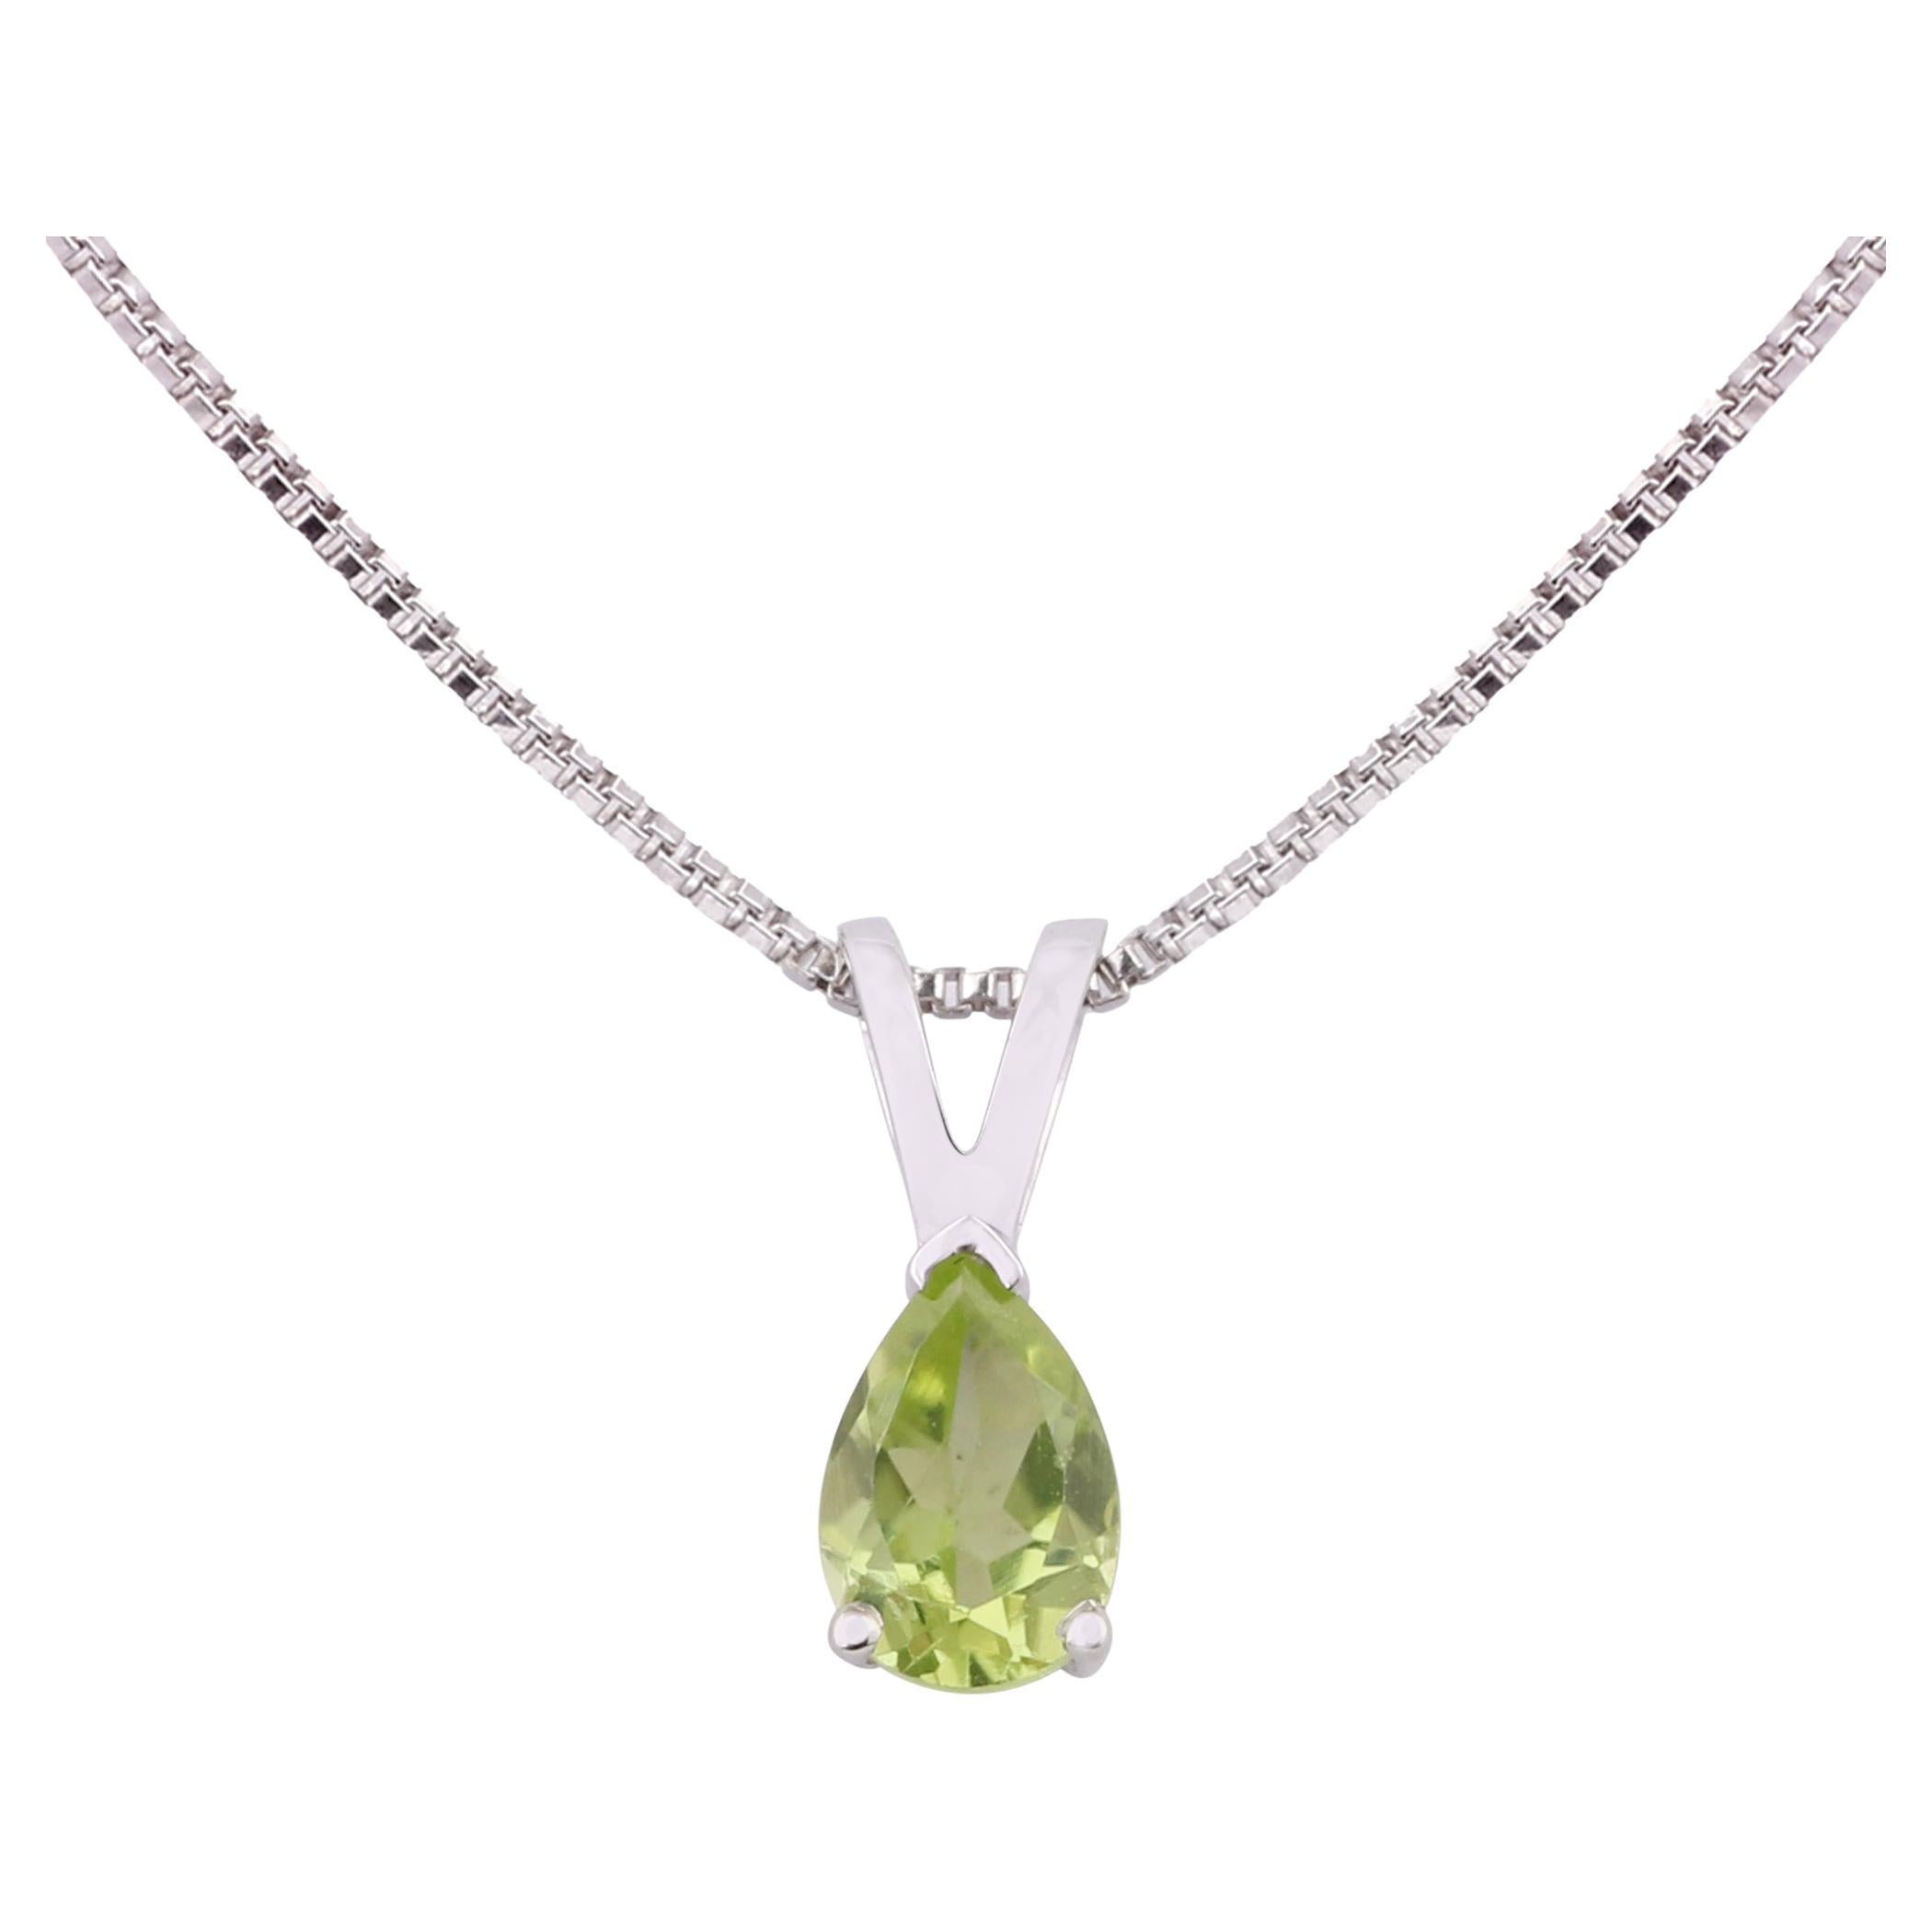 14K White Gold 0.490 Ctw Natural Peridot Solid Dainty Charm Teardrop Pendant